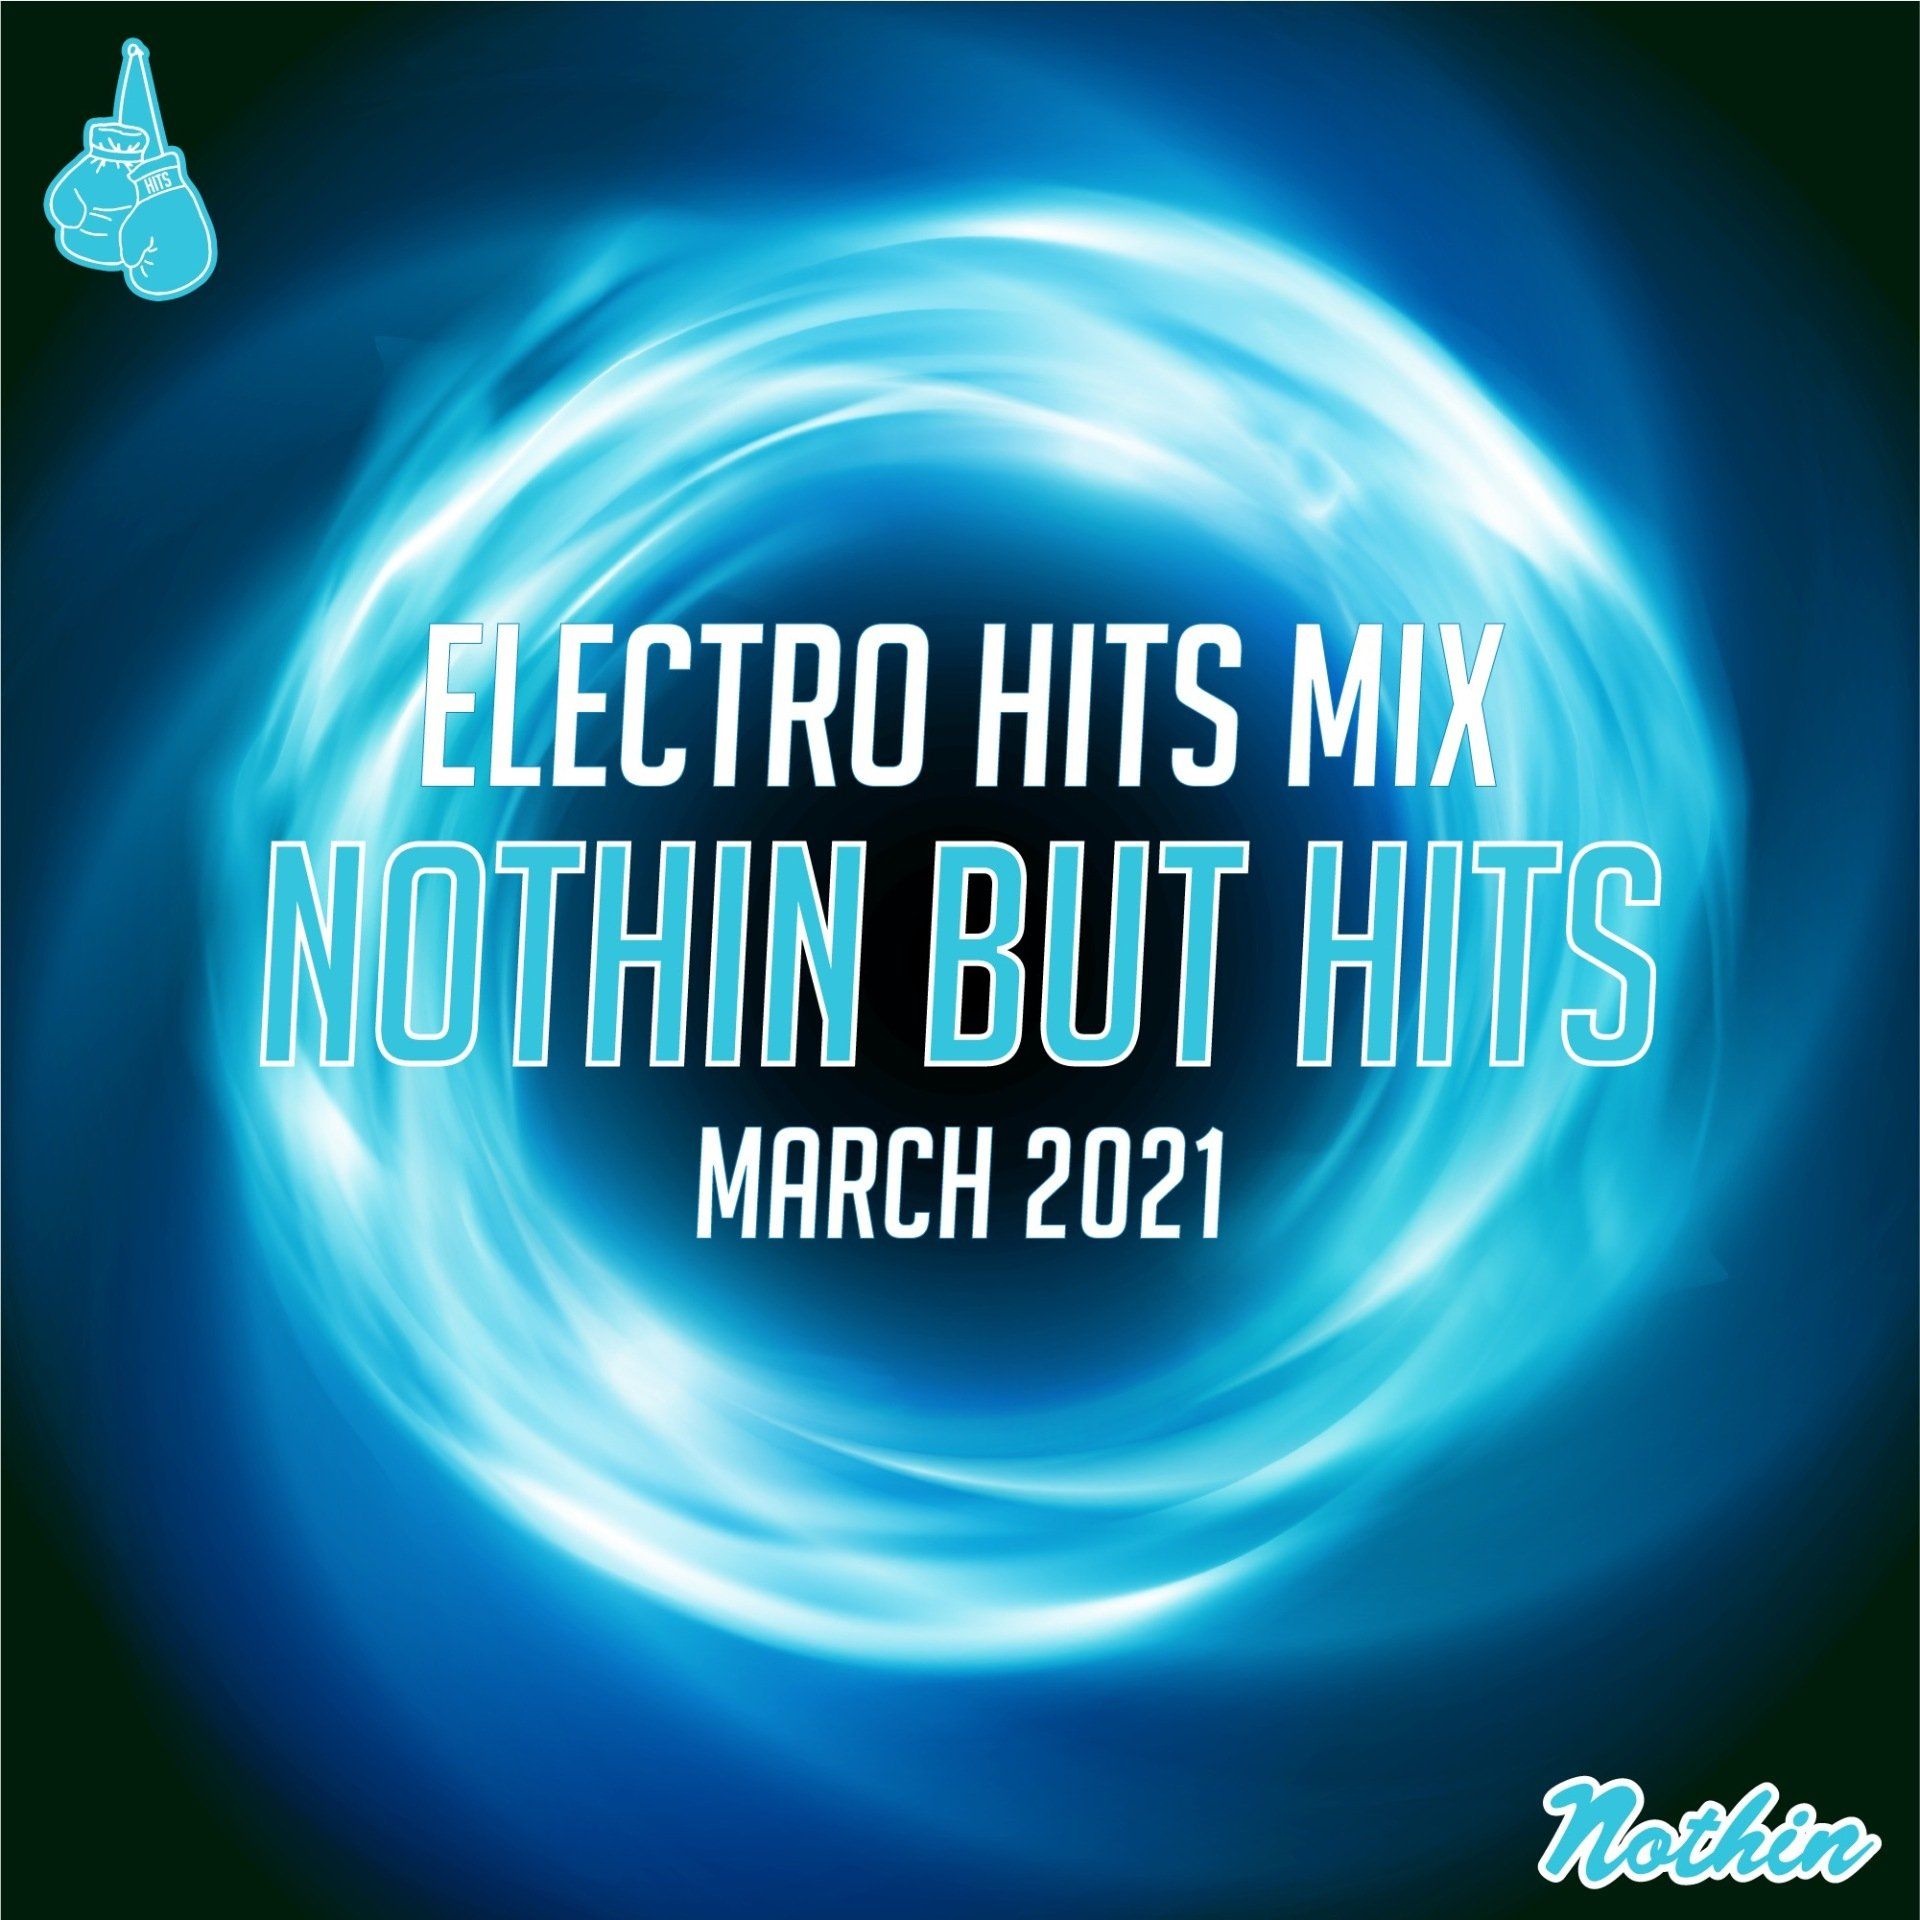 Electro Hits Mix: March 2021